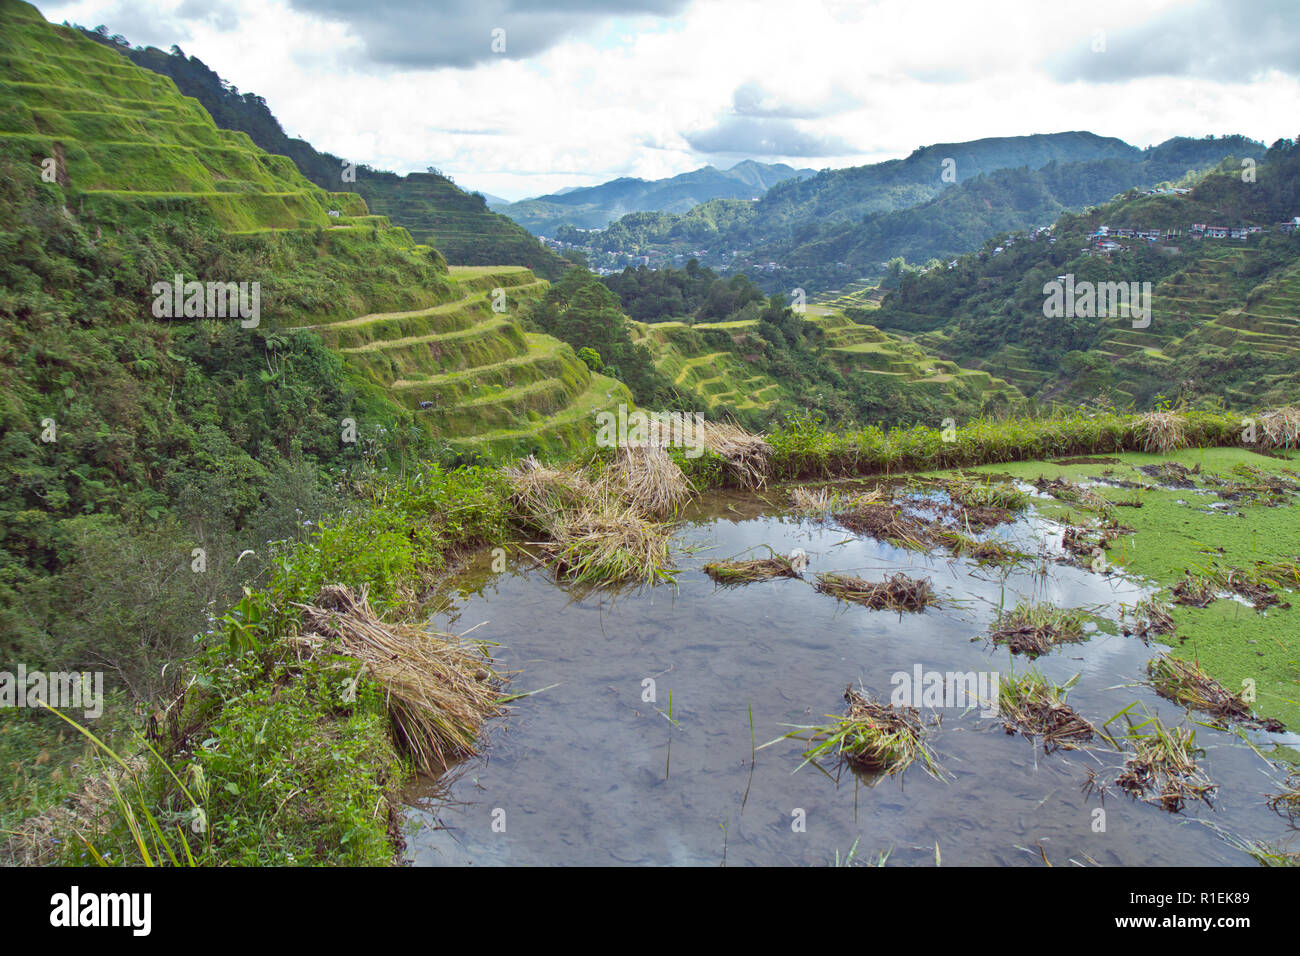 The Banaue Rice Terraces are carved into the mountains of Ifugao in the Philippines by the ancestors of the indigenous people. Stock Photo